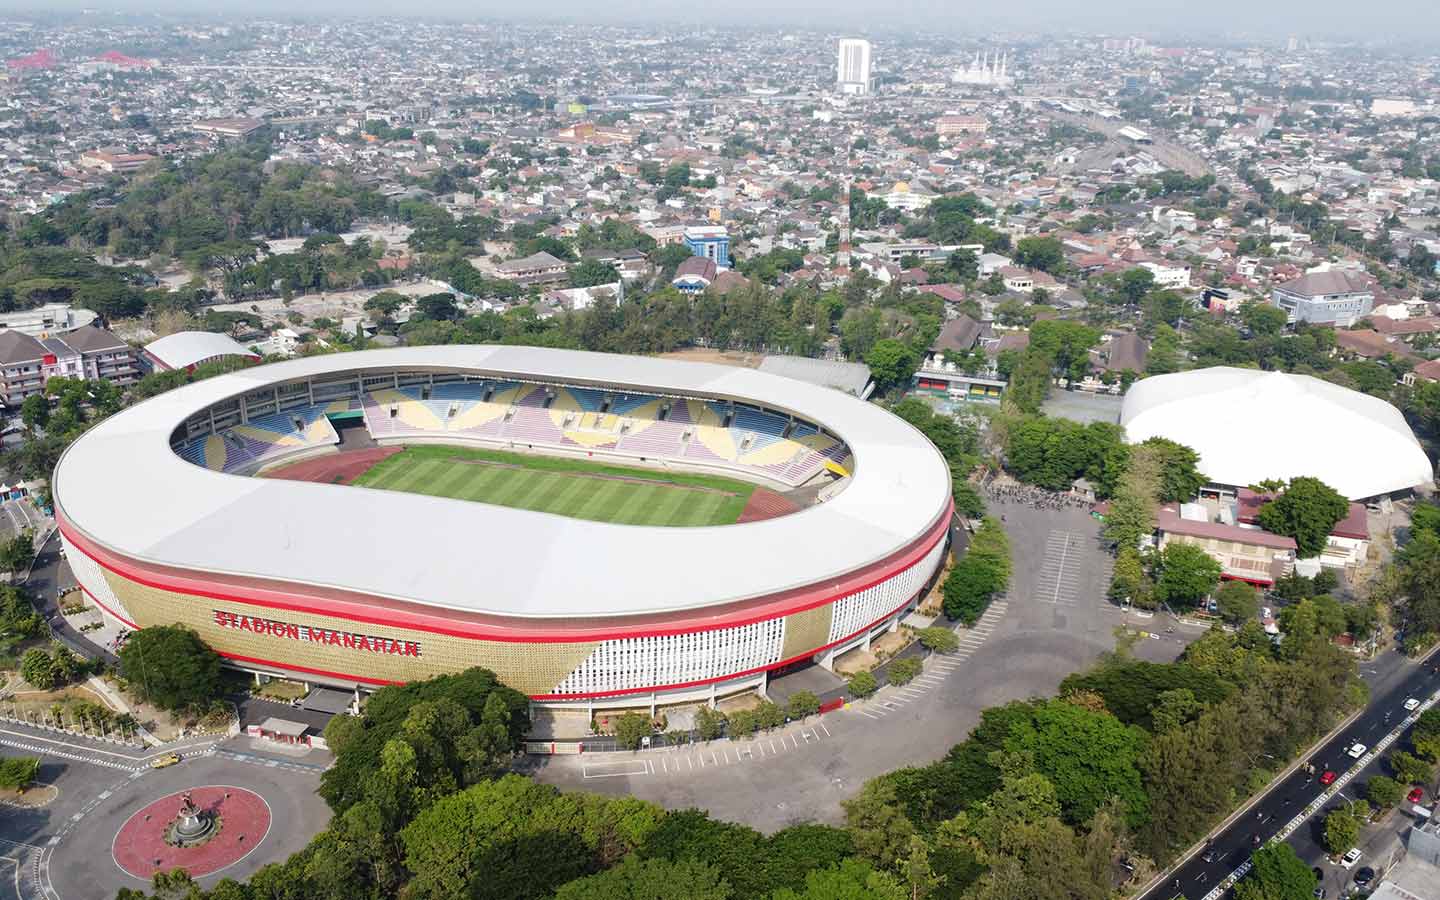 Manahan Stadium with its modern architectural excellence, is ready to hold the FIFA U17 World Cup matches